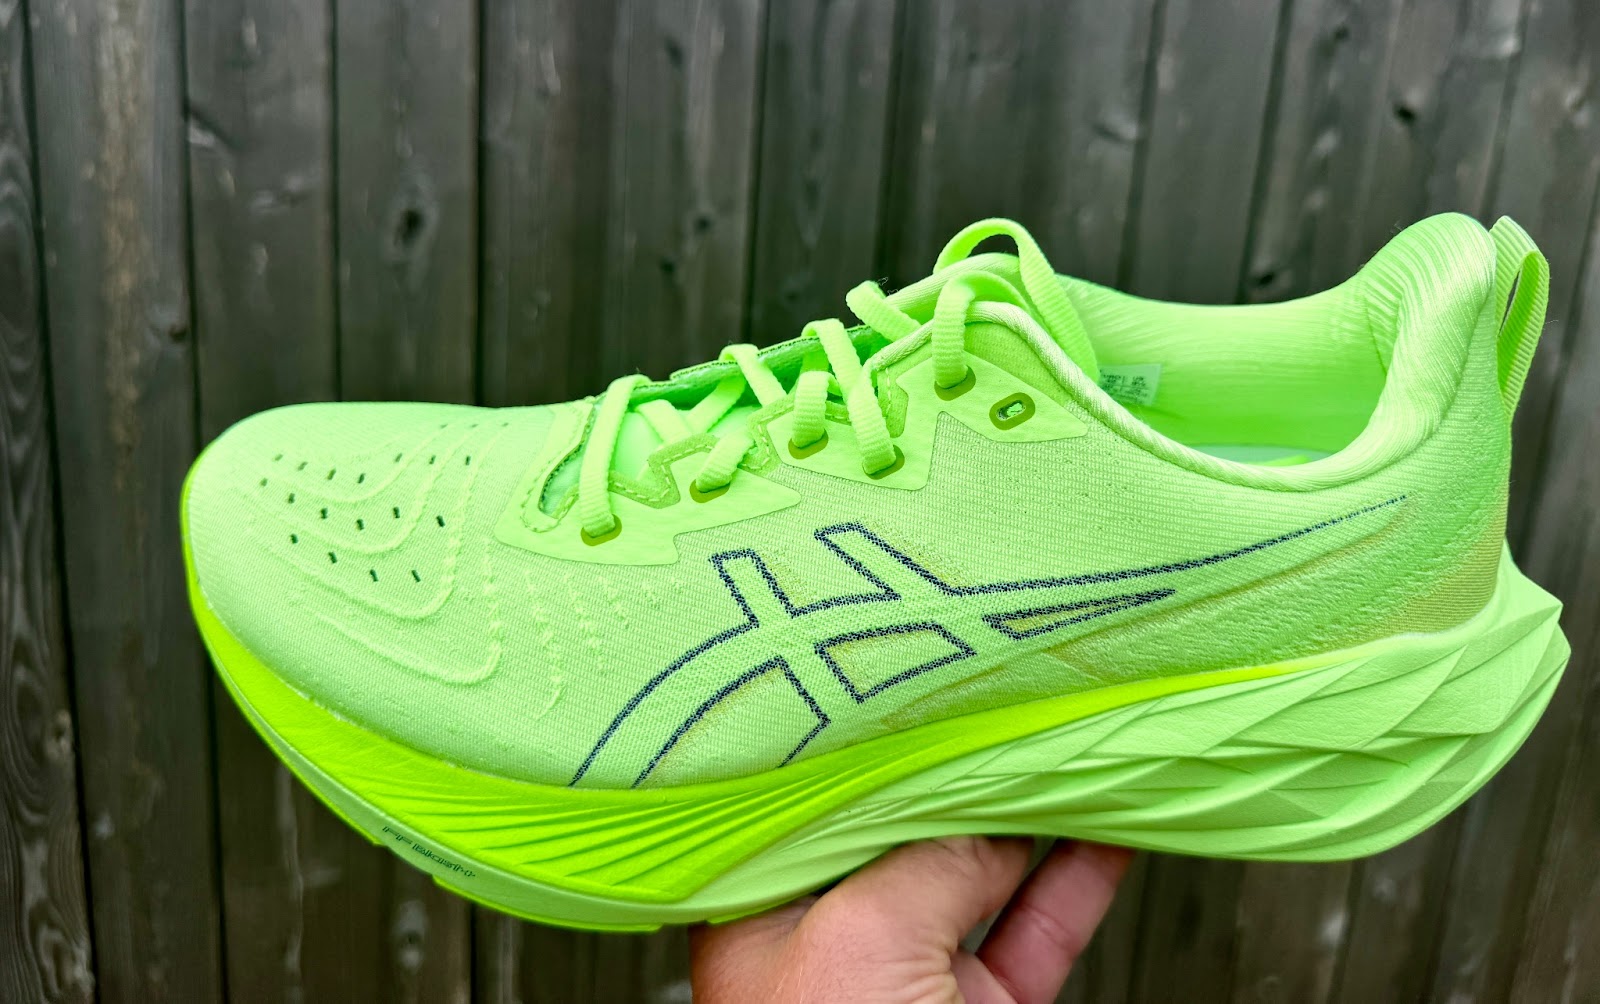 Asics Novablast 4: A More Stable and Versatile Daily Trainer